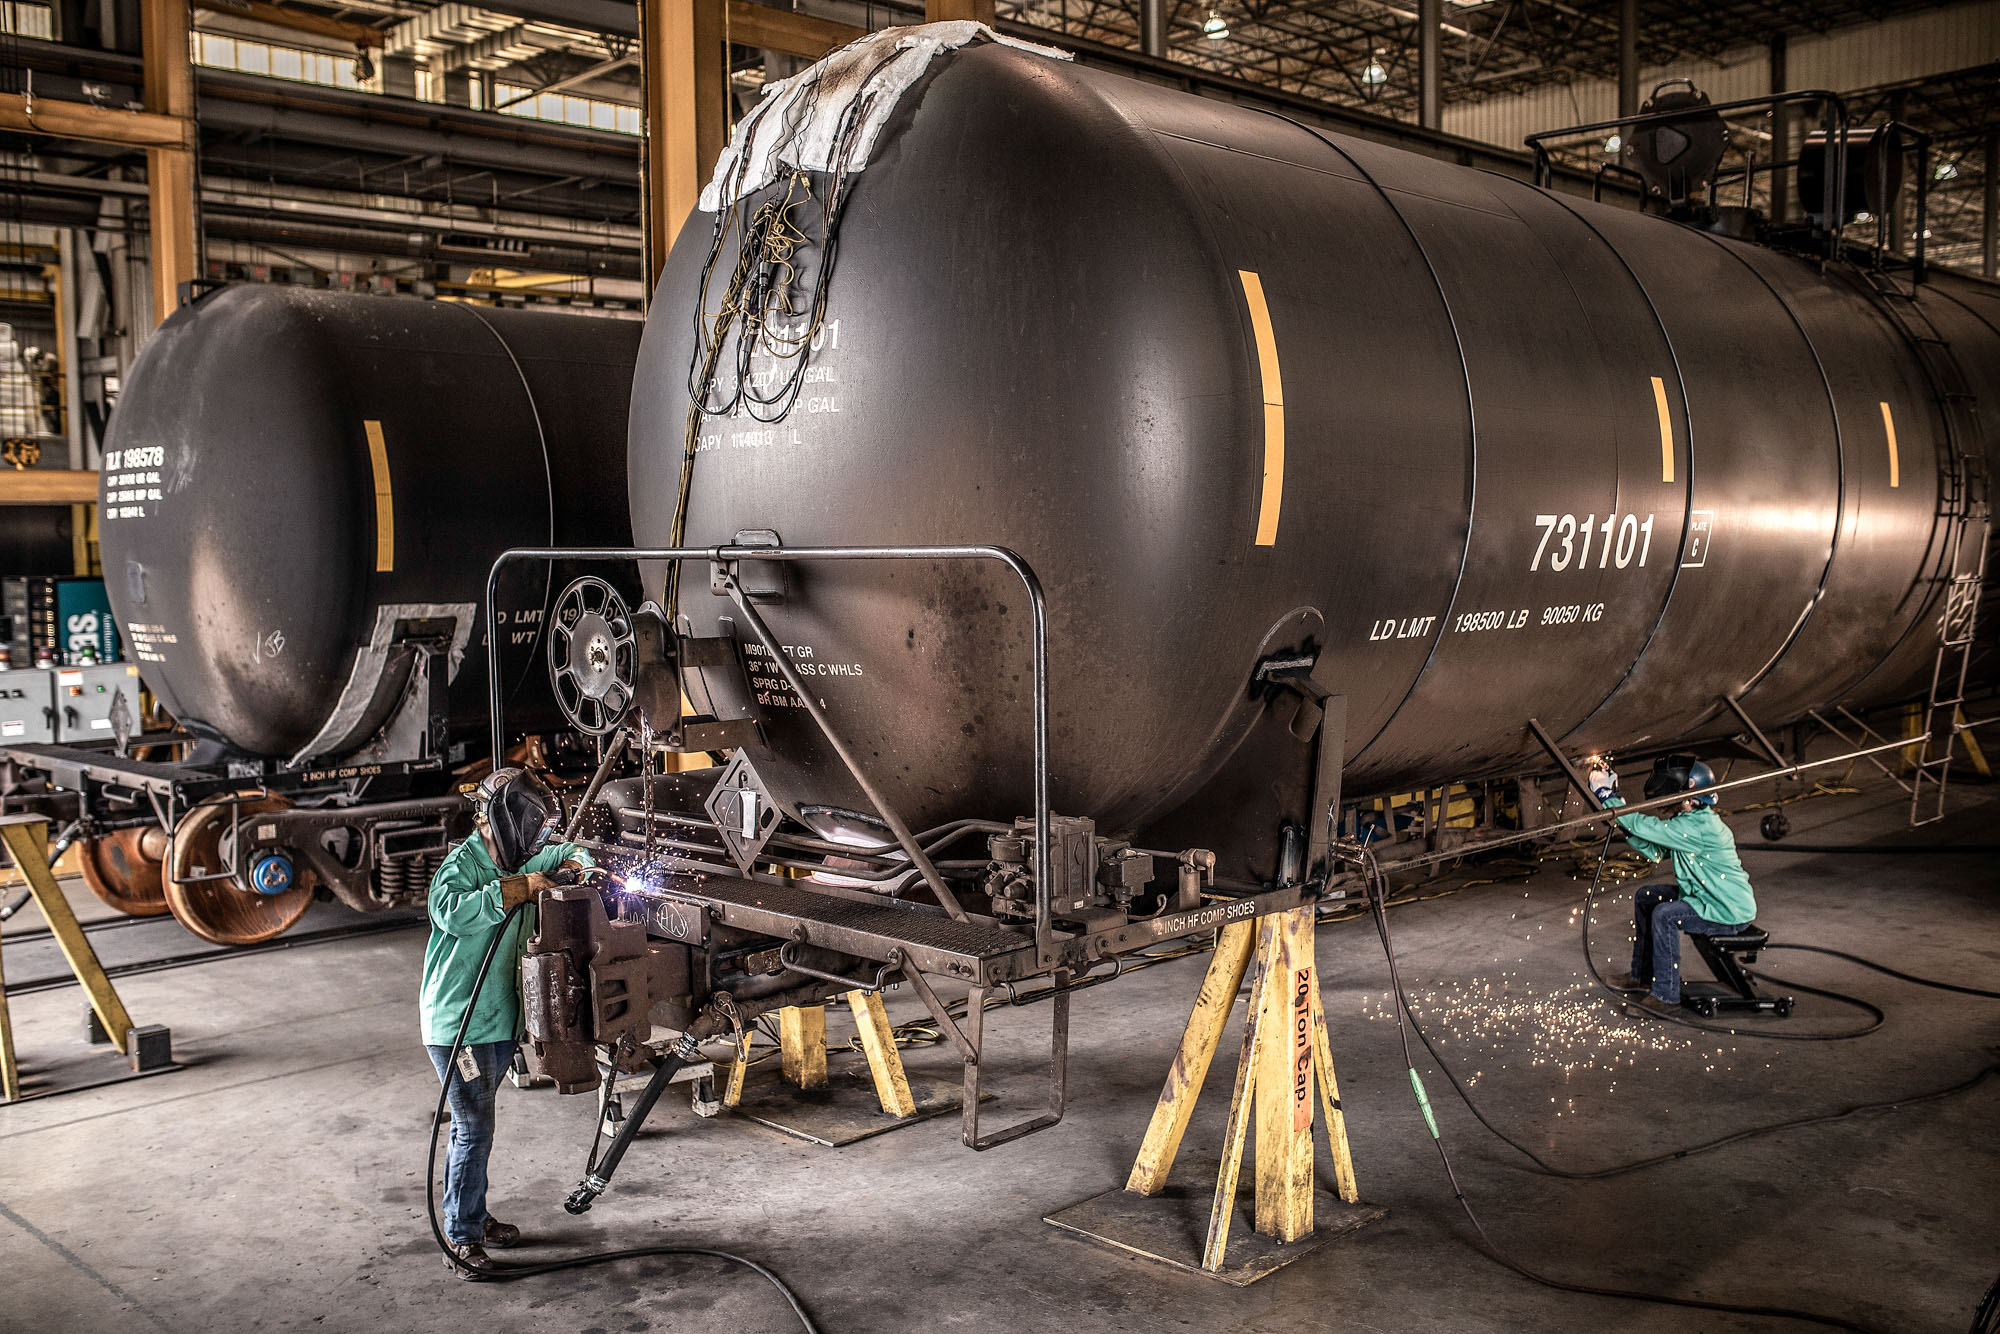 2 welders working on train tank car at industrial plant